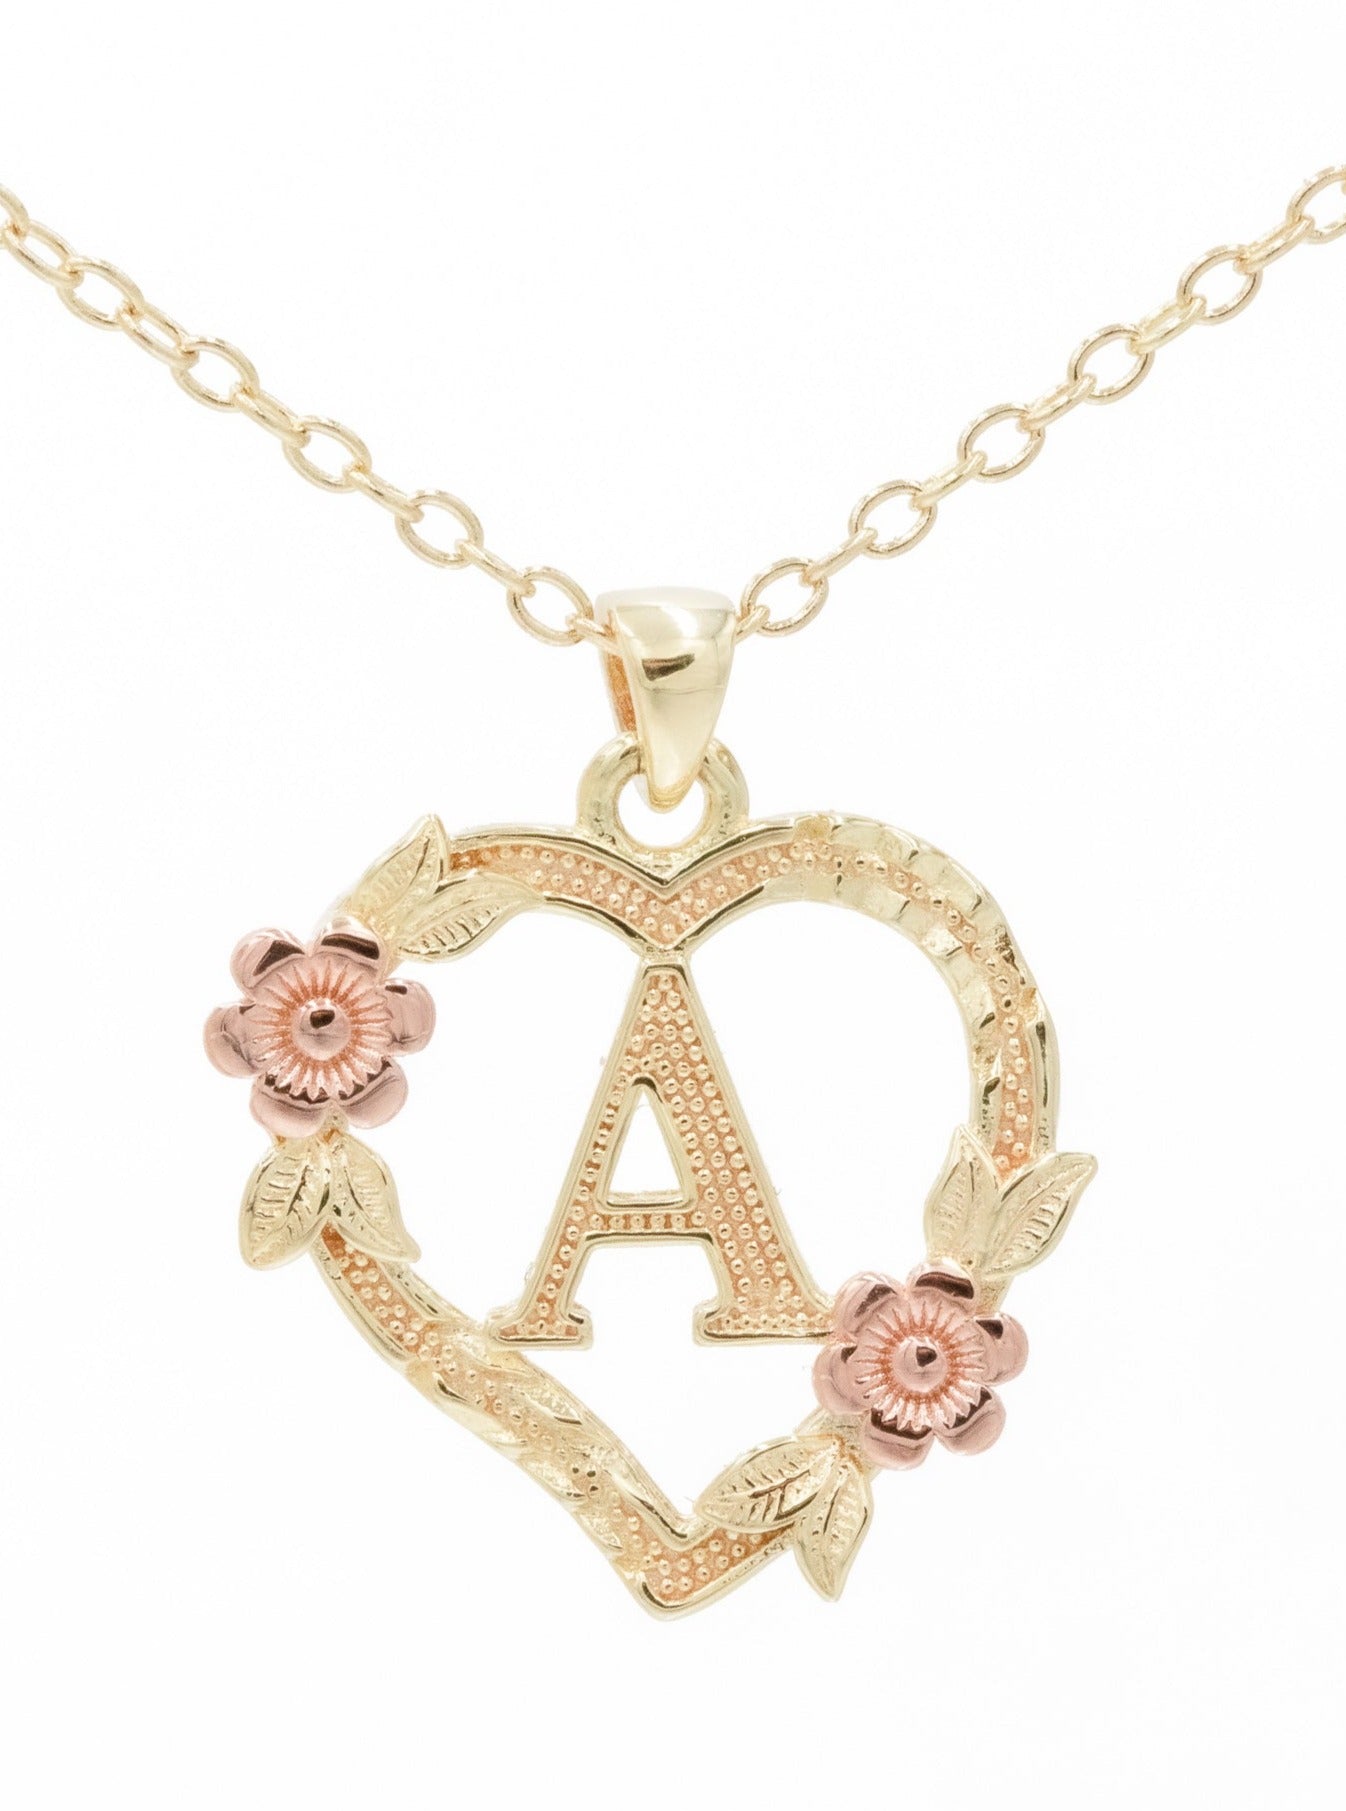 14KT Gold Over Silver Floral Heart Initial Necklace